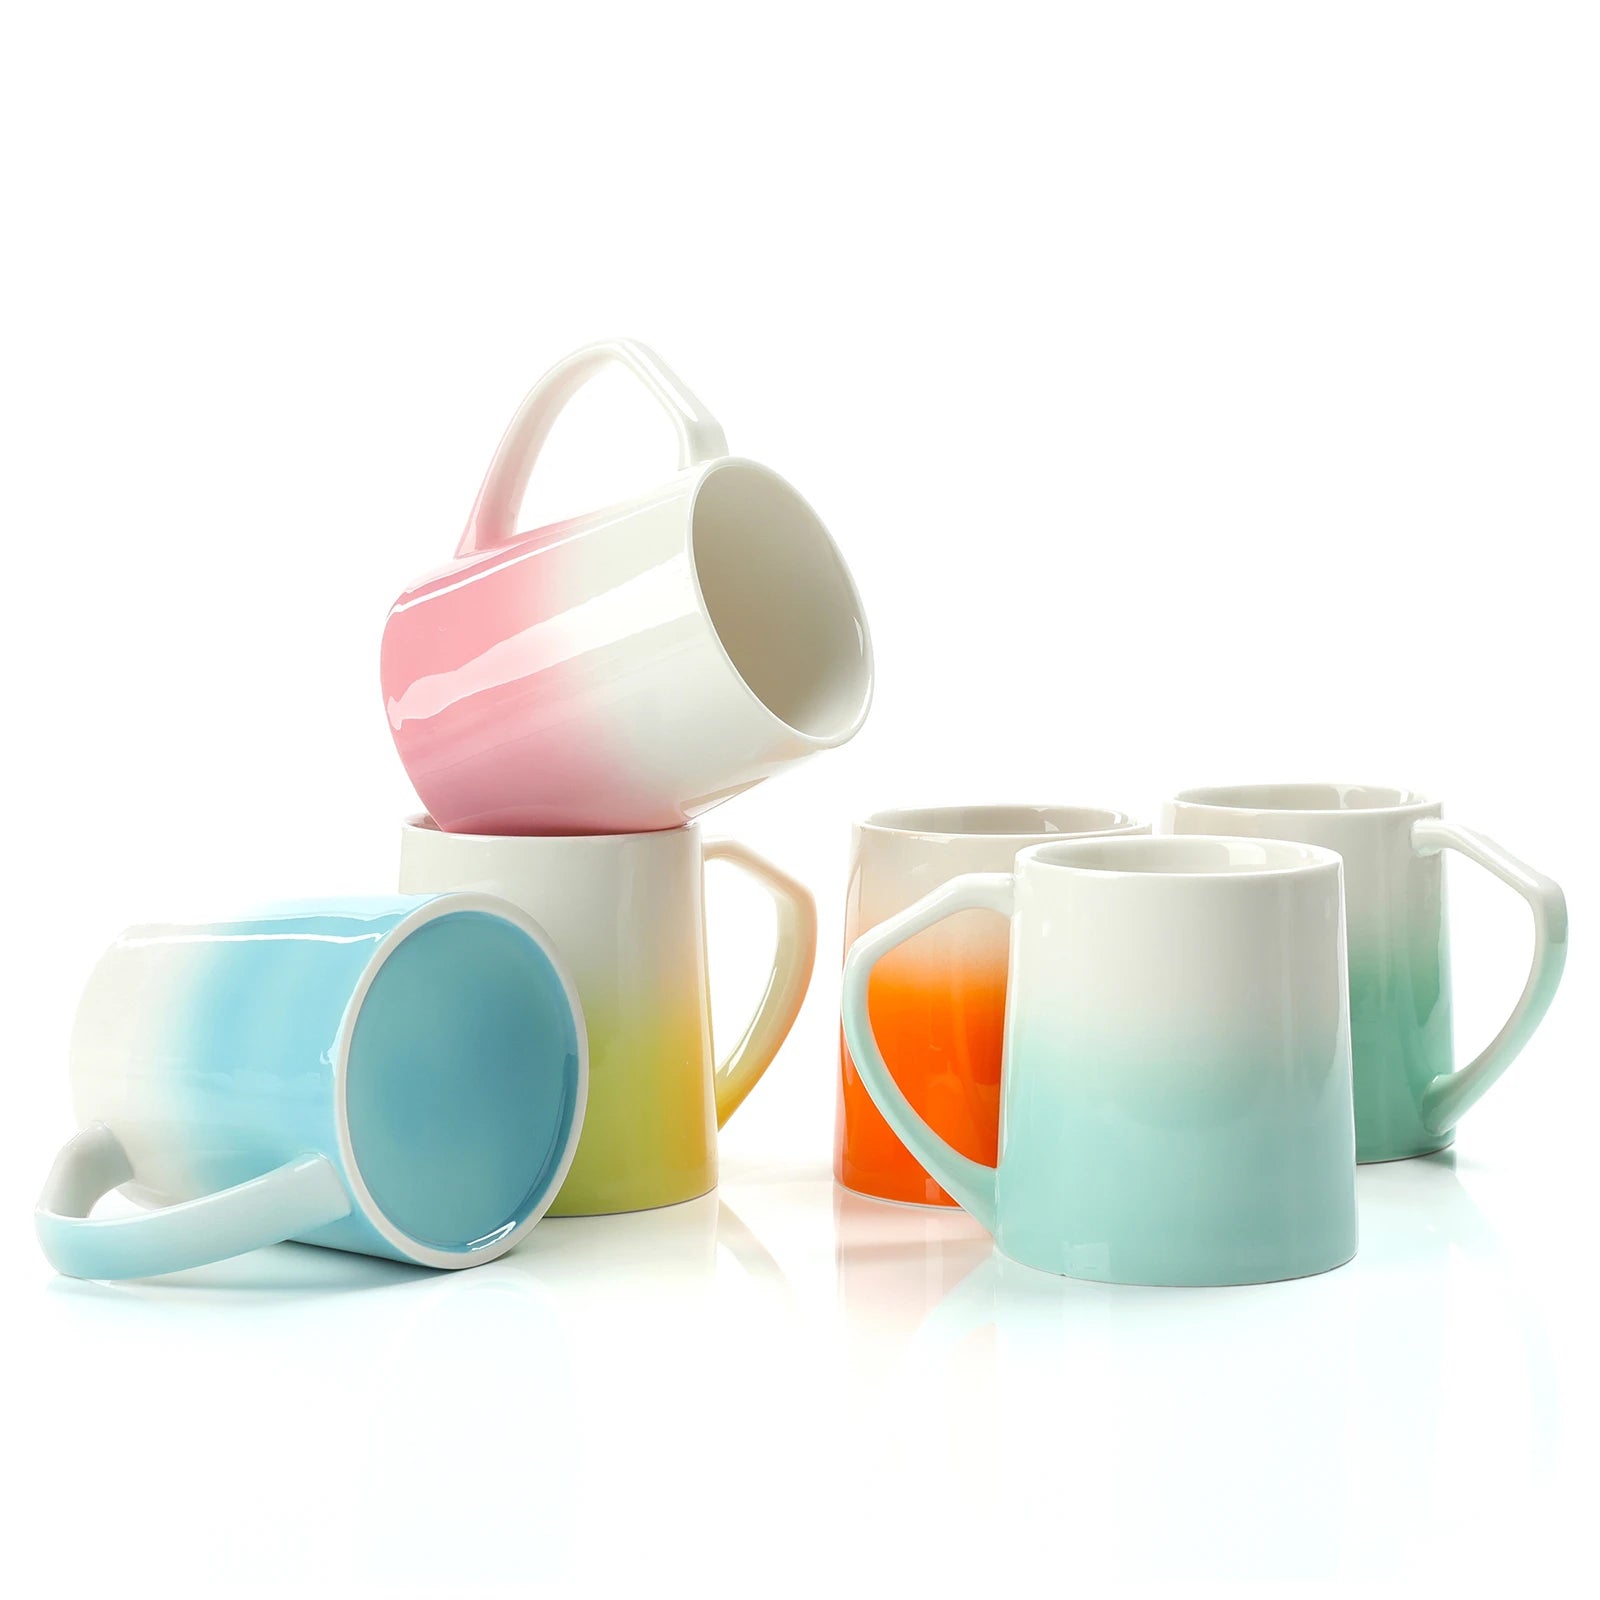 Annovero Coffee Mugs, Set of 6 Modern Colorful Cute Porcelain Mugs/Cups  with Large Handle, for Women…See more Annovero Coffee Mugs, Set of 6 Modern